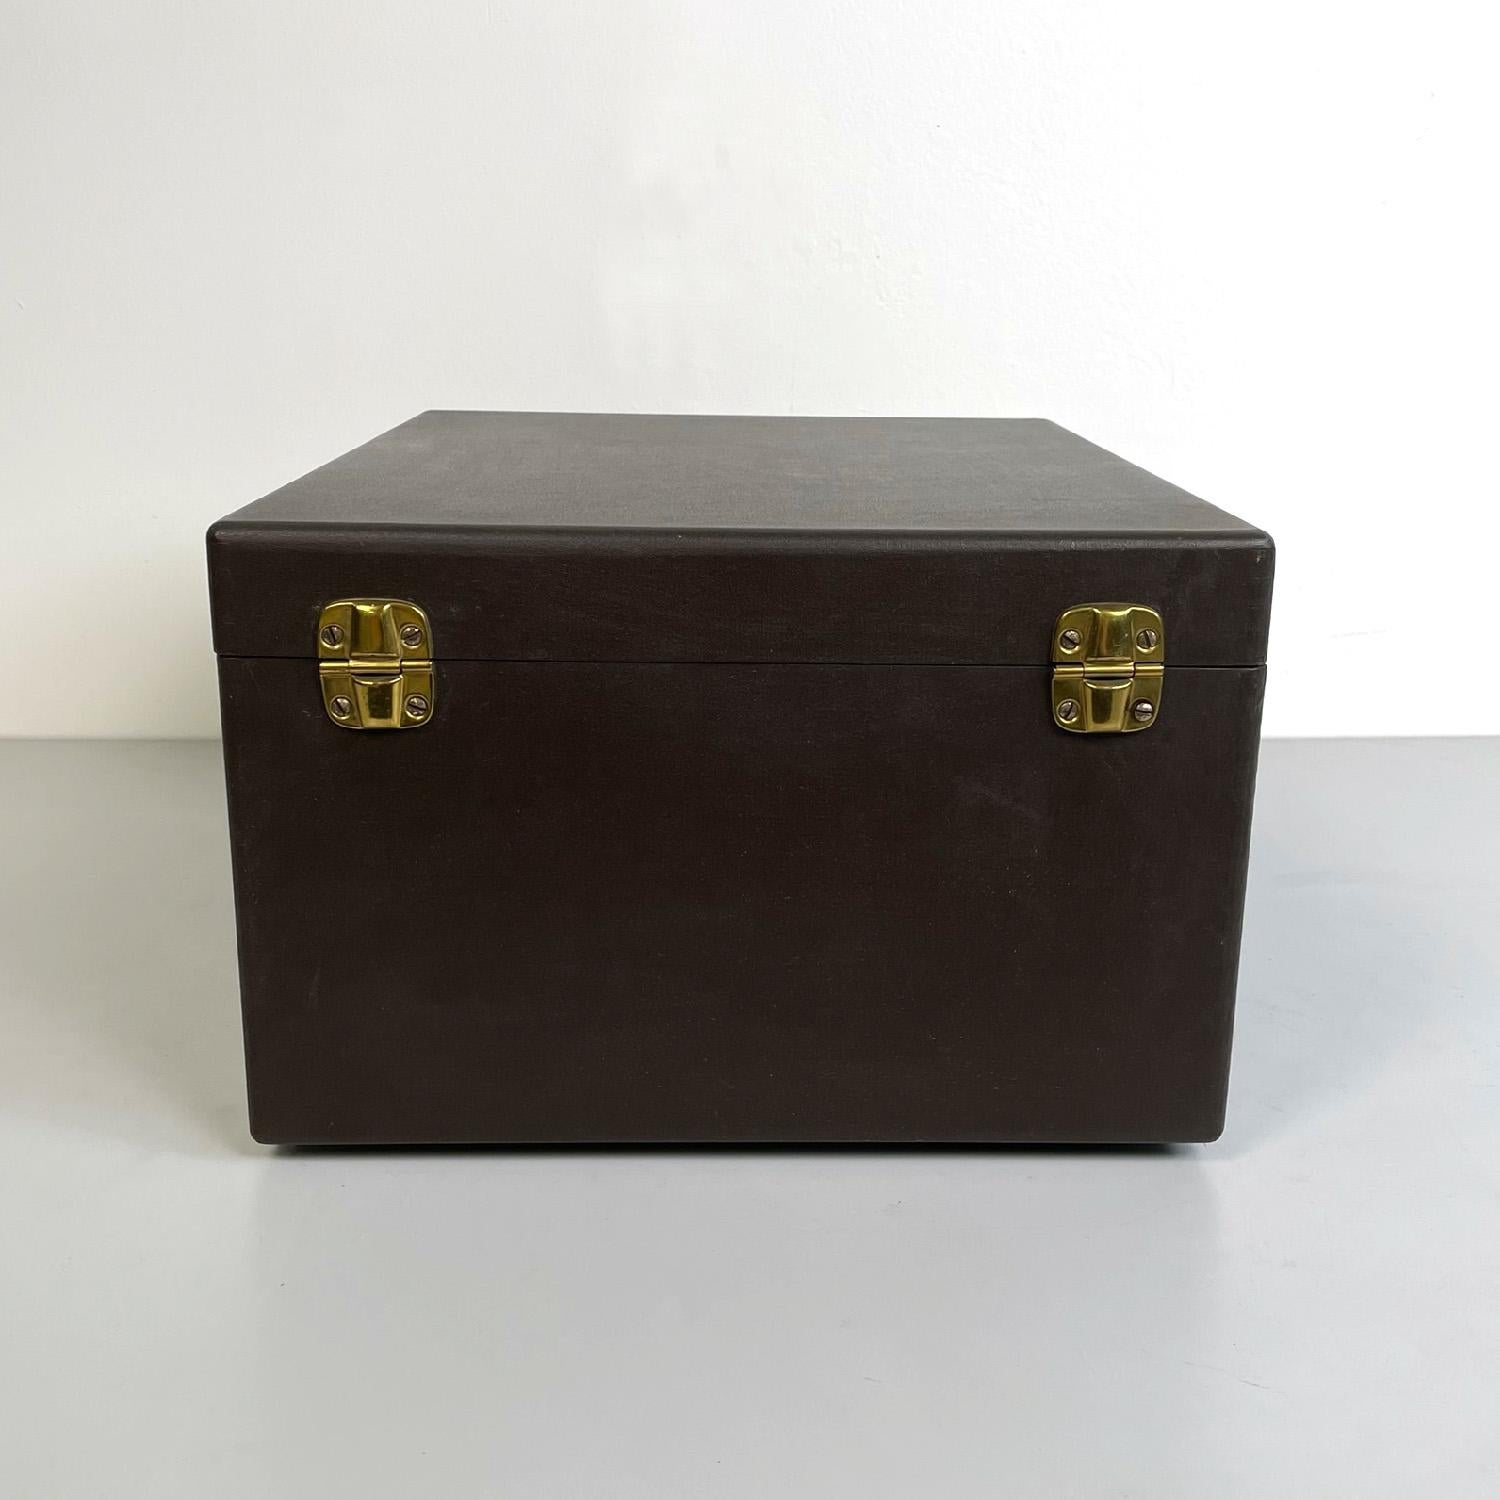 Metal English mid-century modern vinyl record player case by His Master's Voice, 1950s For Sale